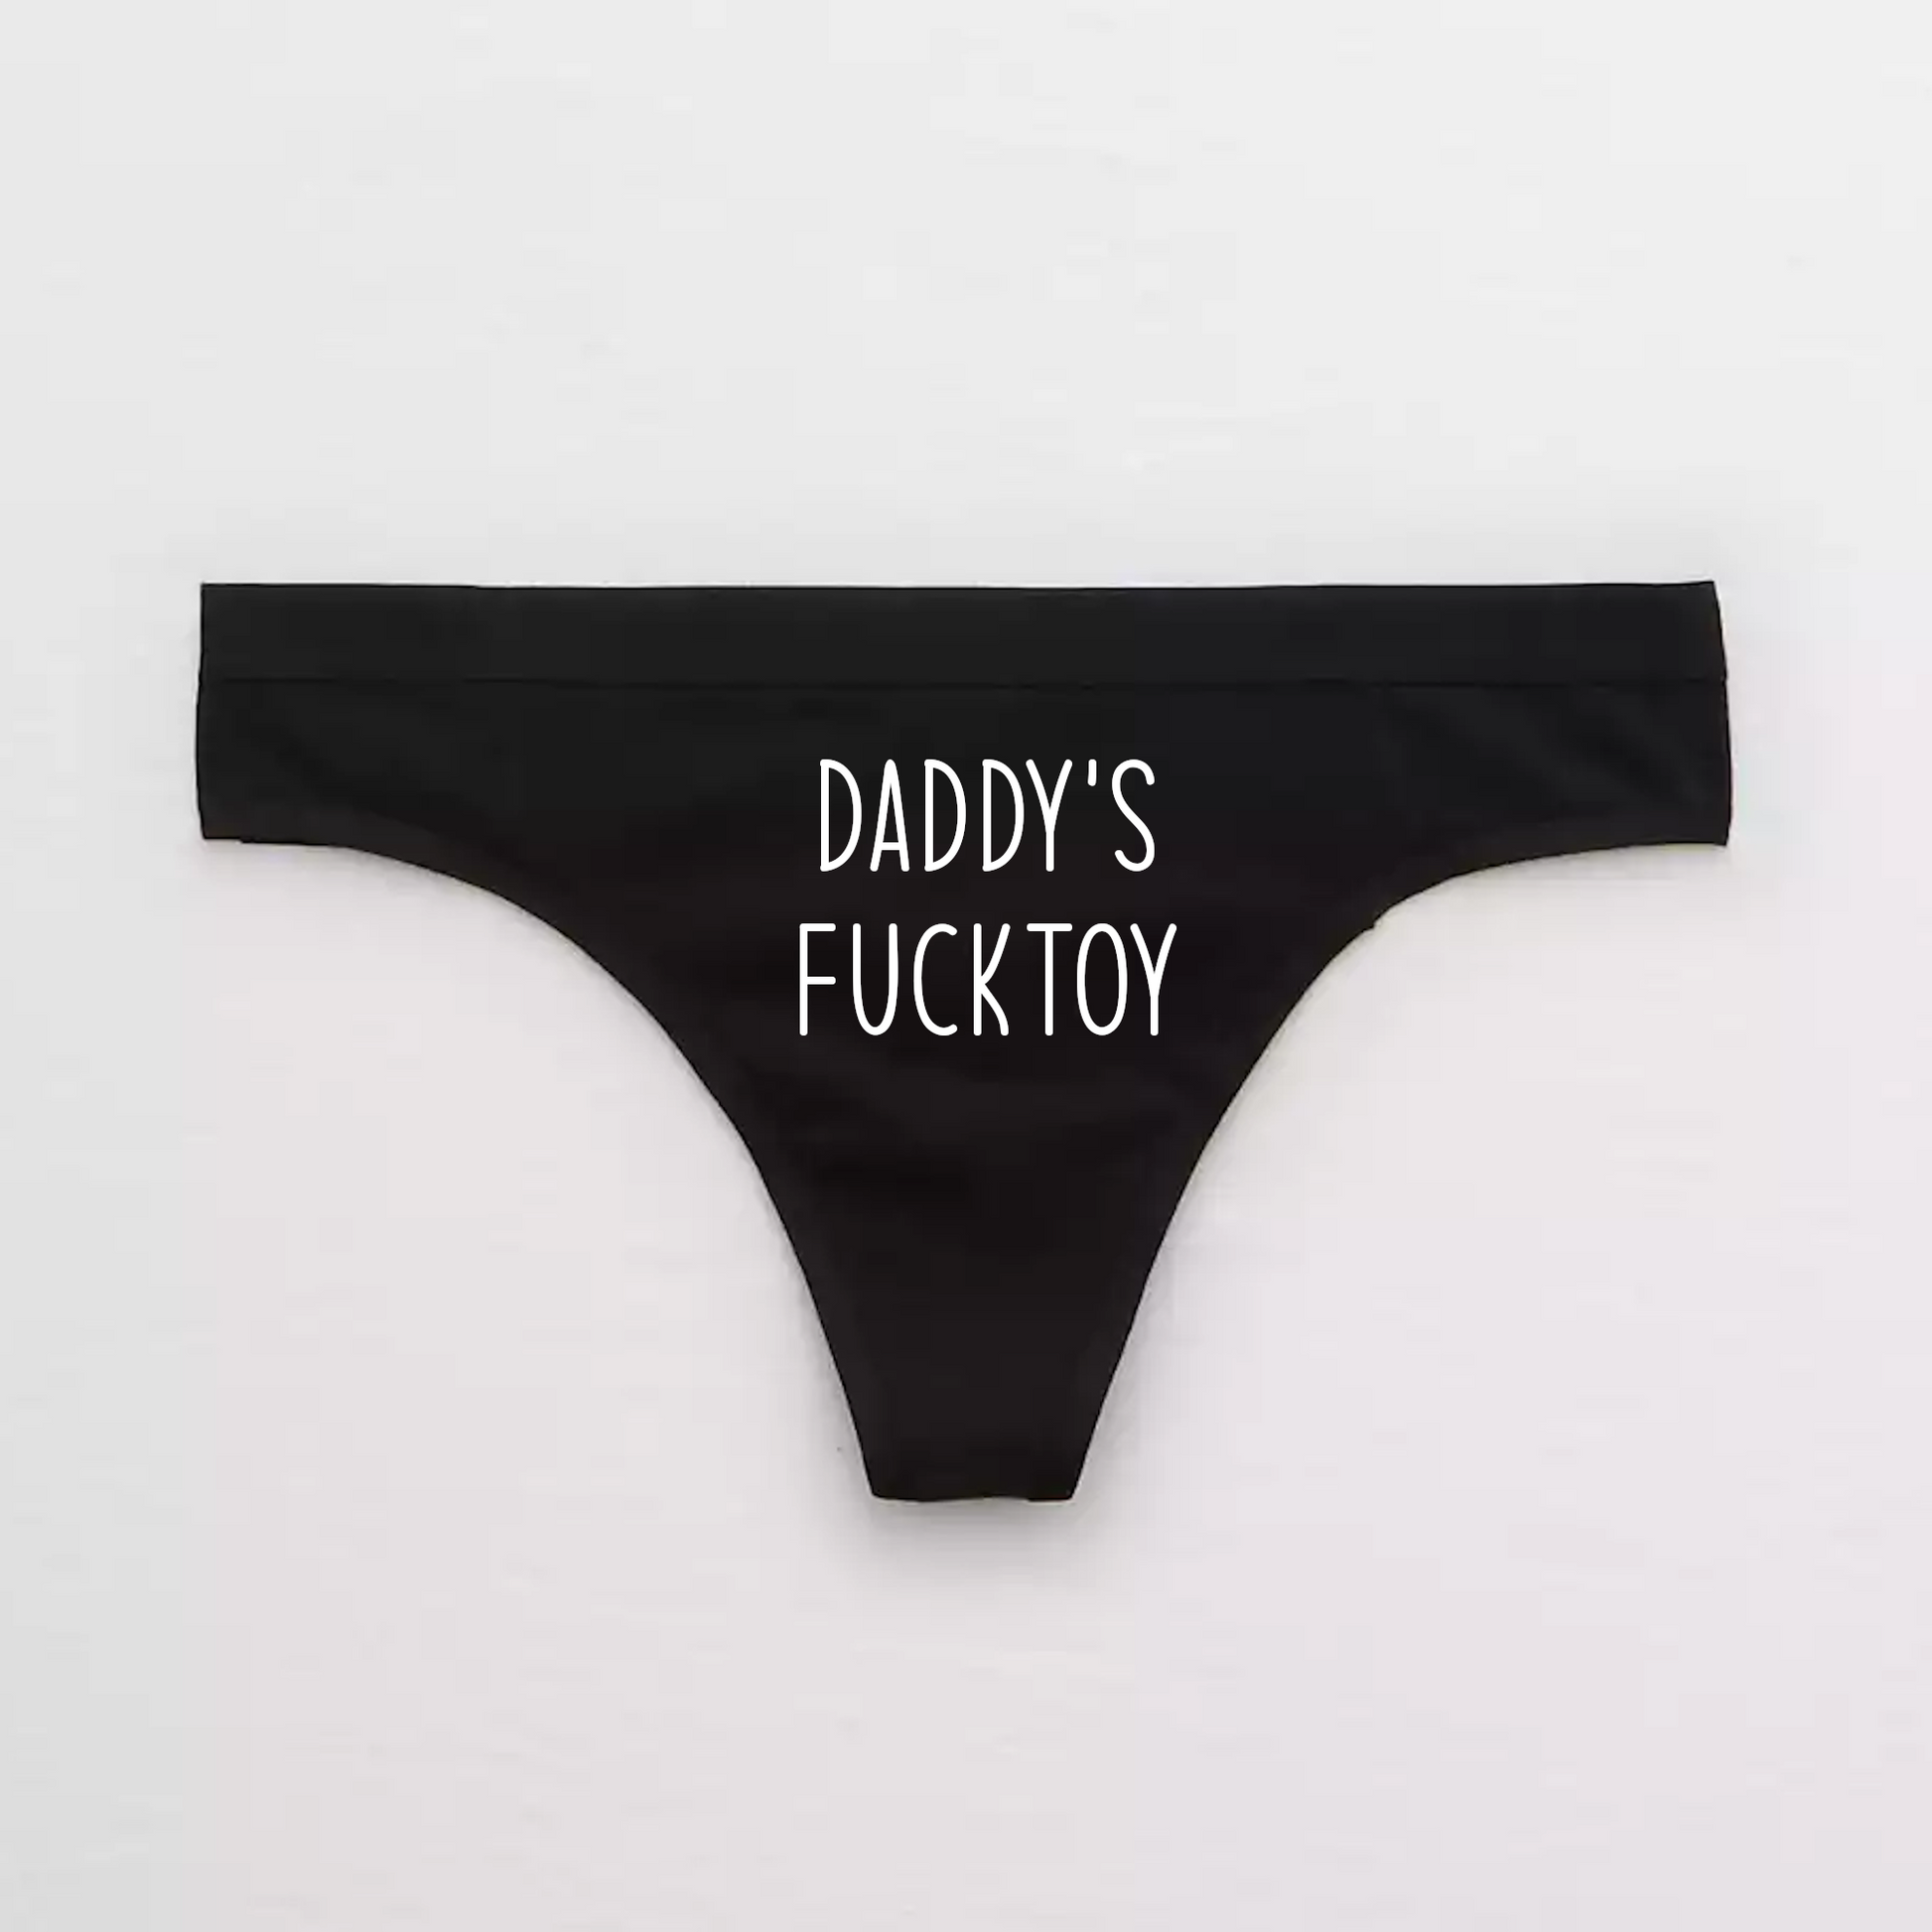 Daddys Fucktoy Naughty Panties for DDLG Kink